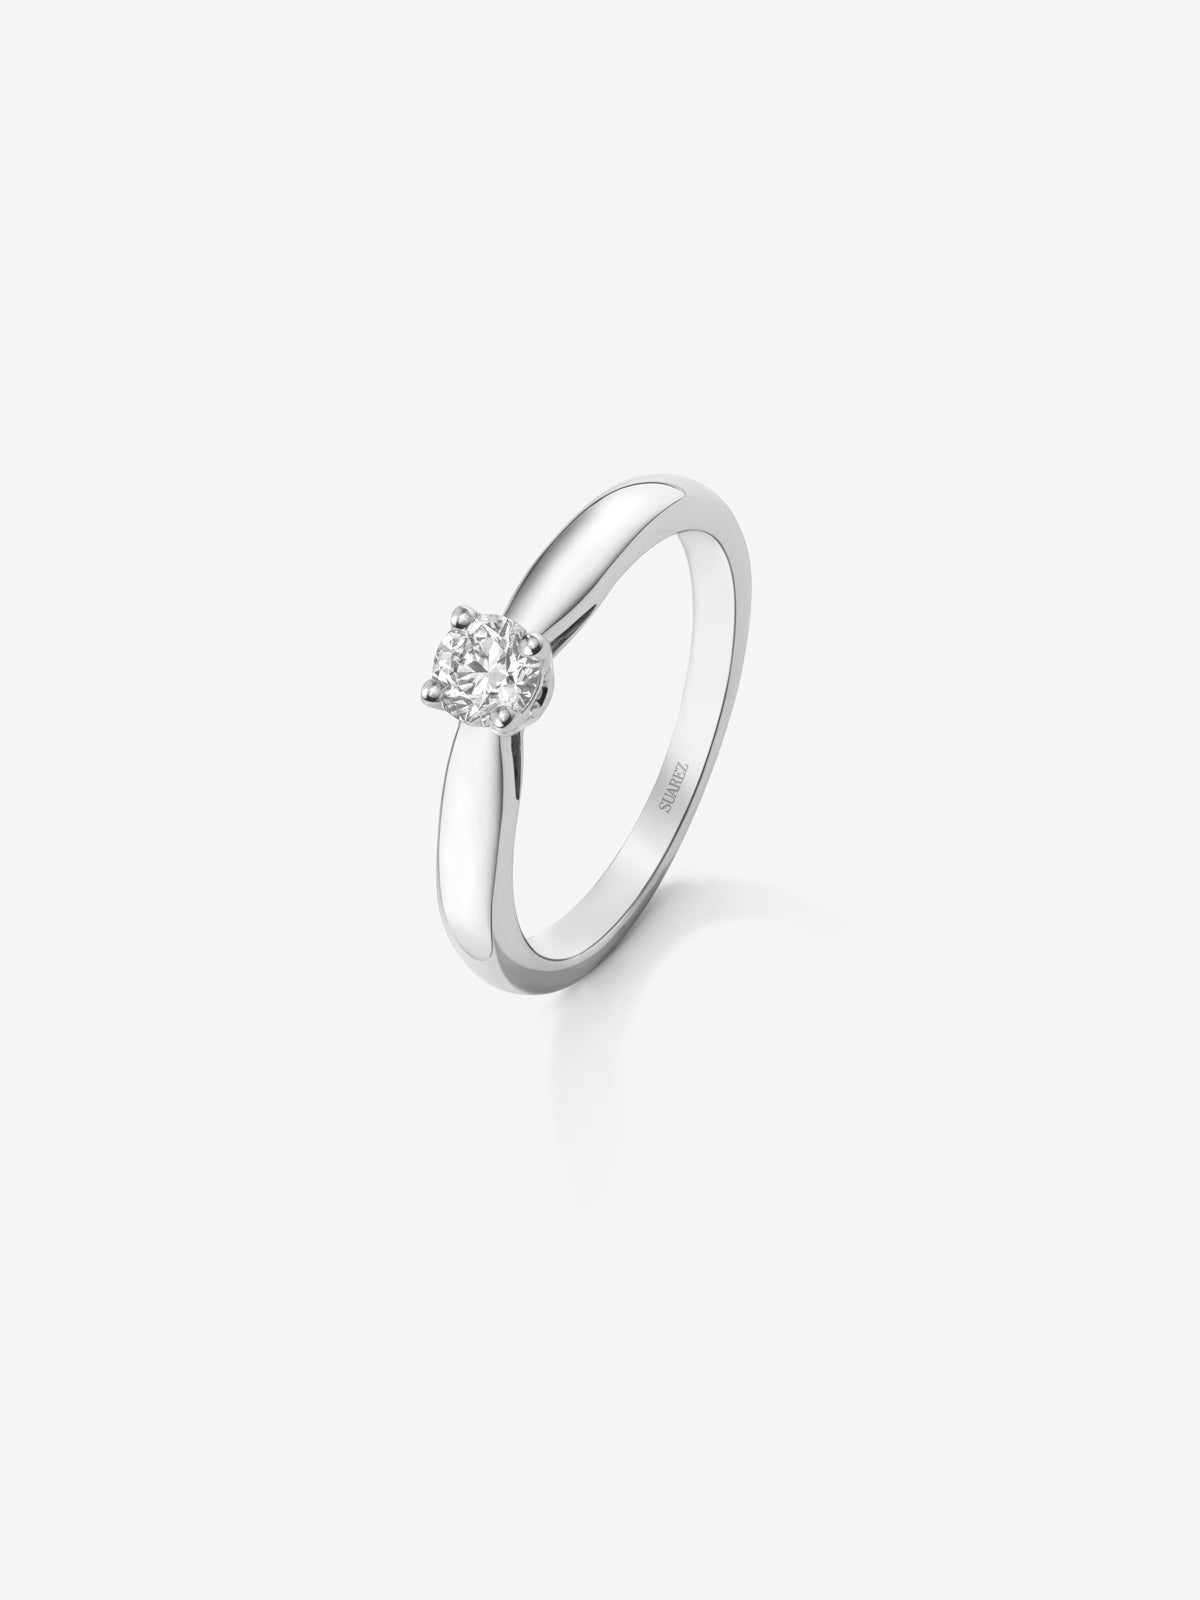 18K white gold solitary ring with white diamond in 0.3 cts